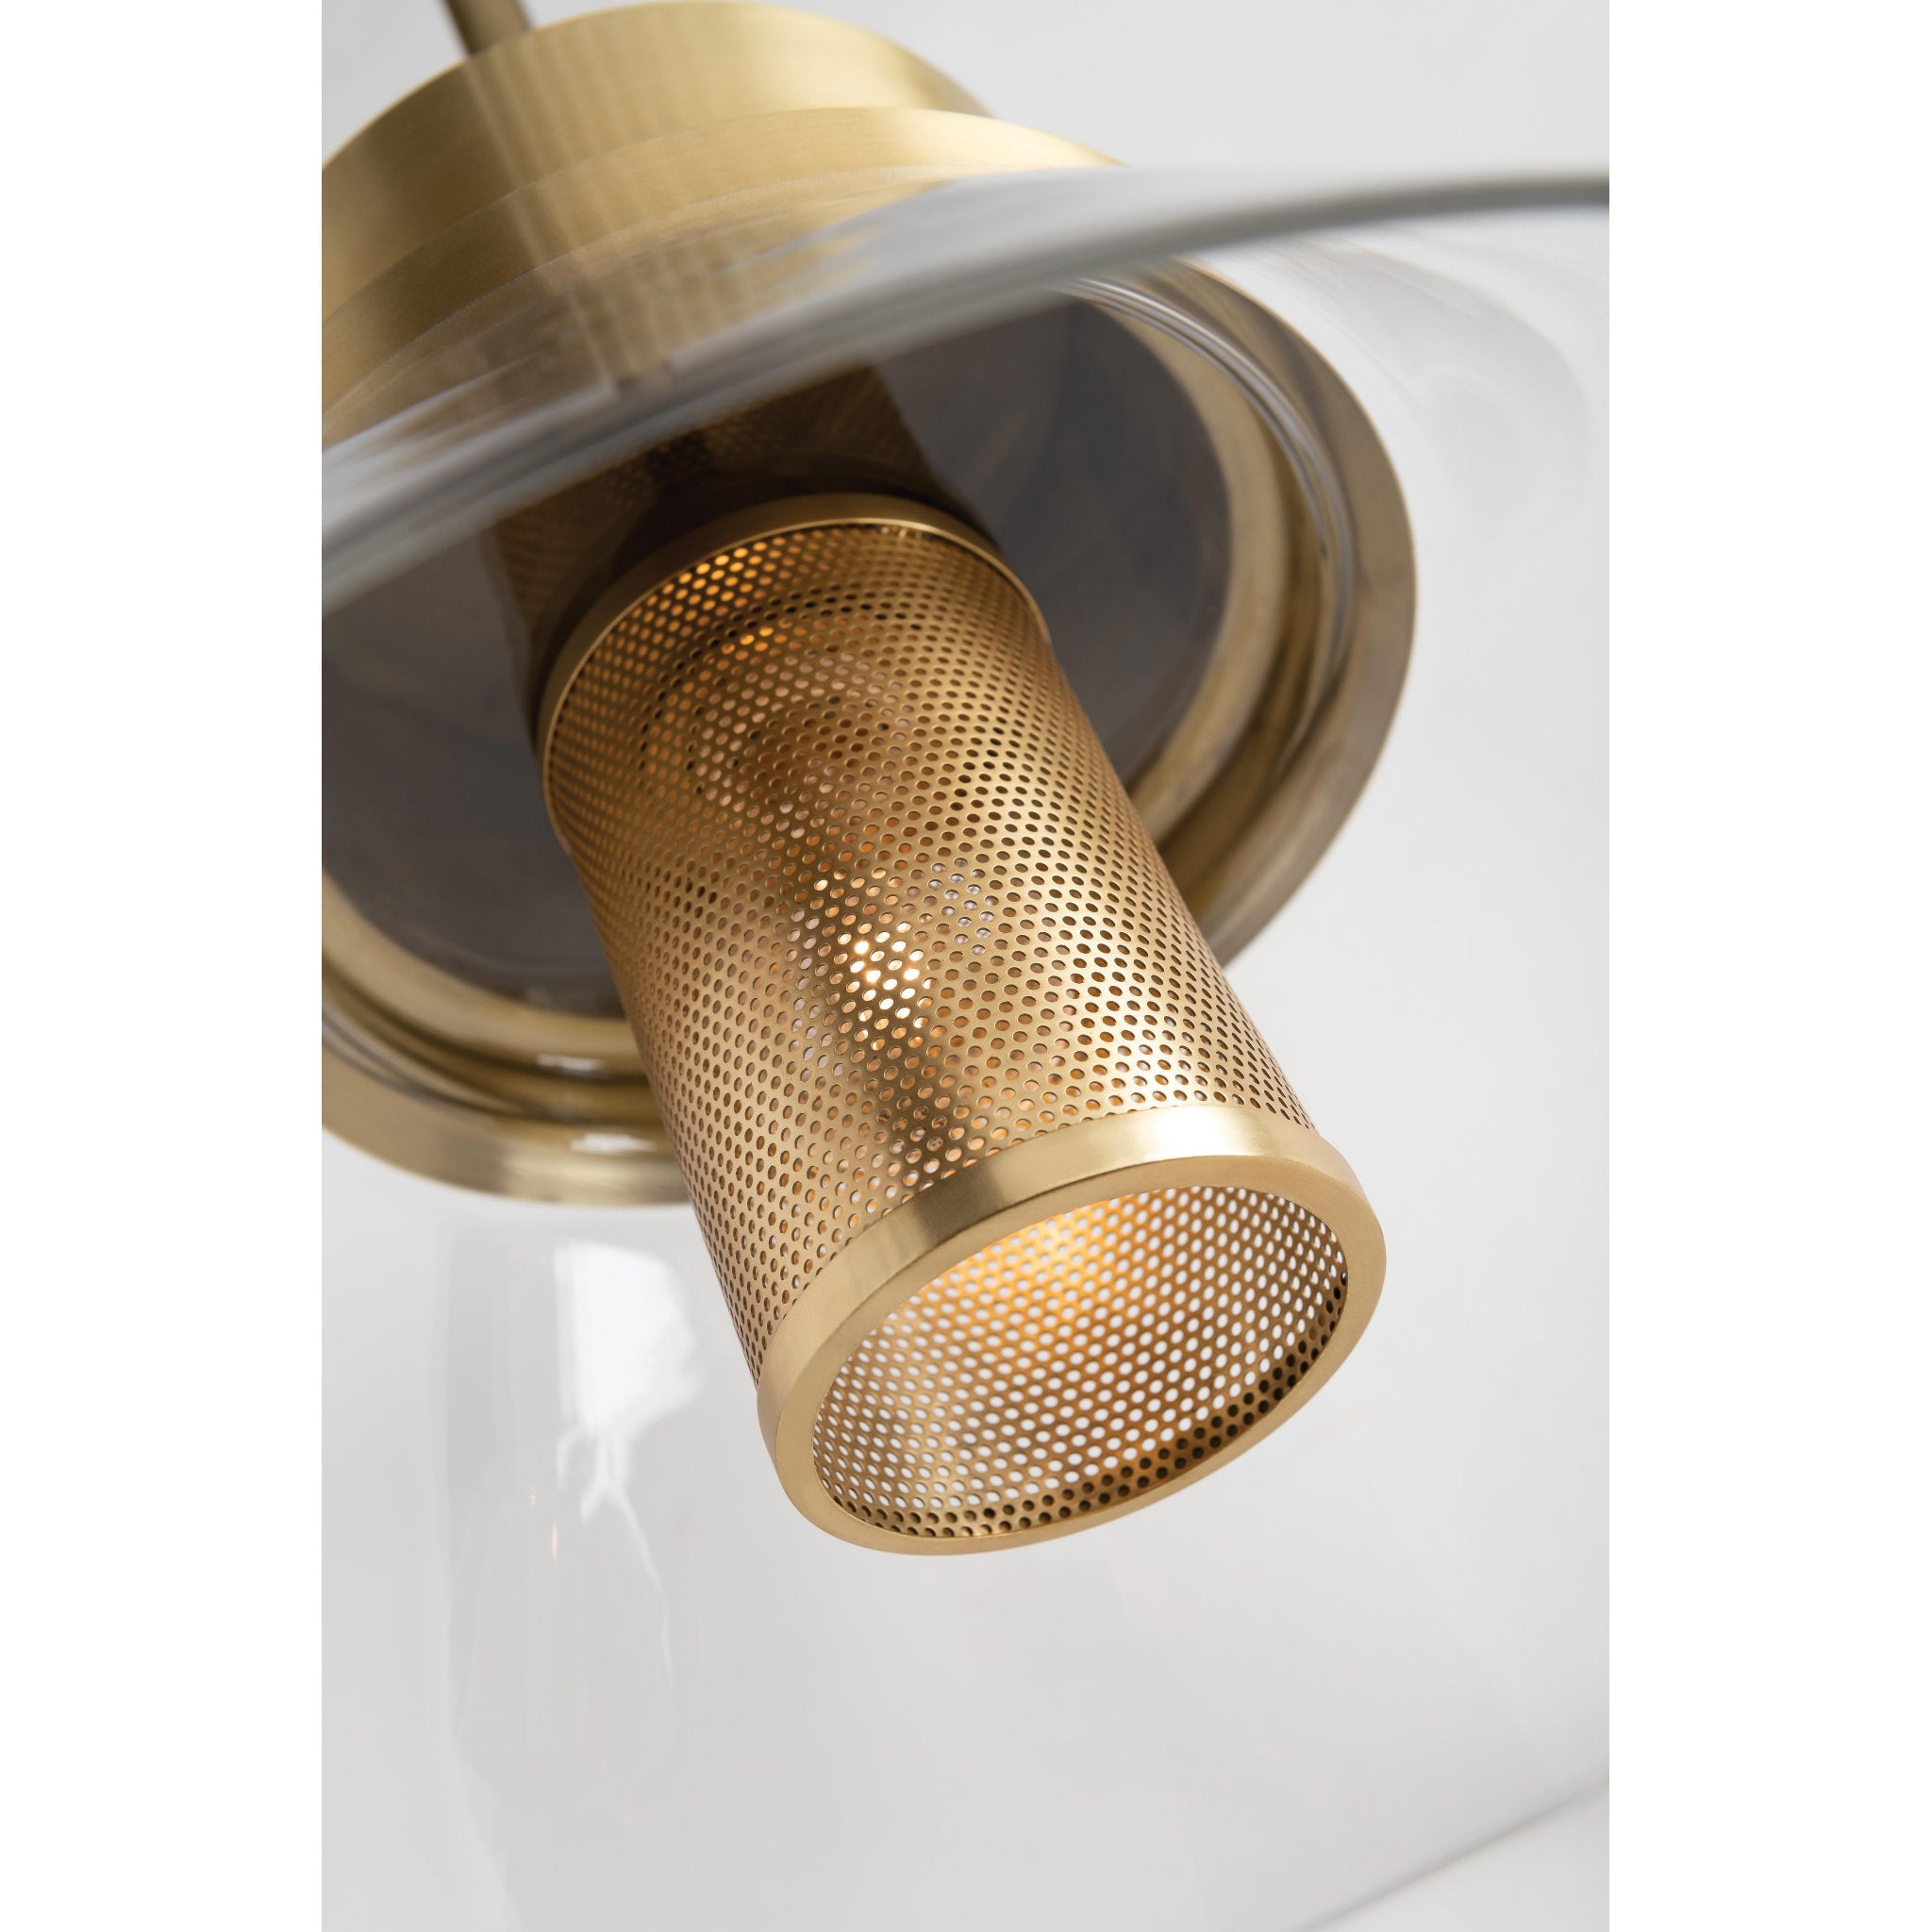 Paoli 1 Light Wall Sconce in Aged Brass